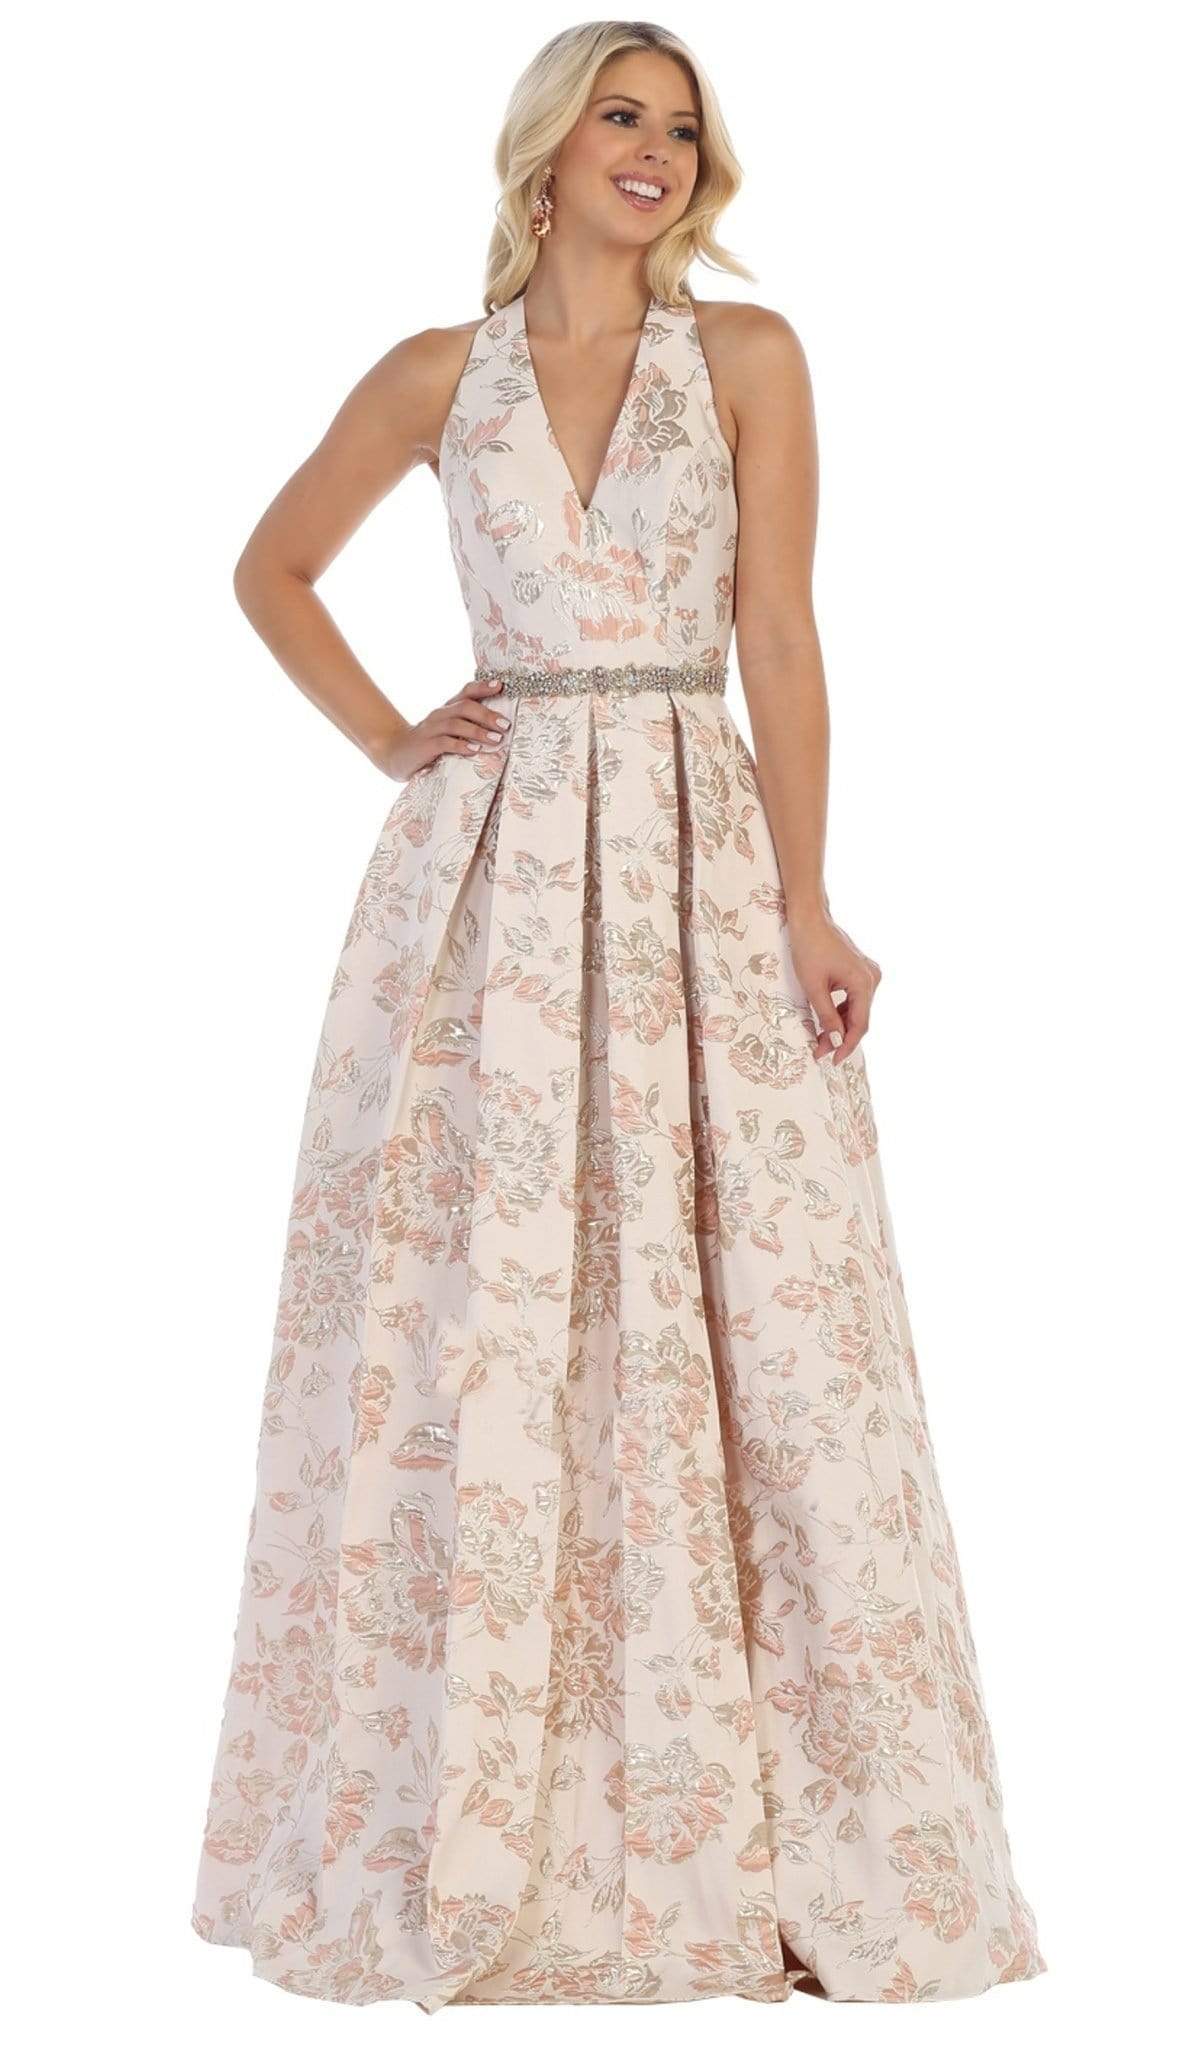 May Queen - RQ7731 Floral Detailed Halter V-neck A-line Dress Special Occasion Dress 2 / Dusty-Rose